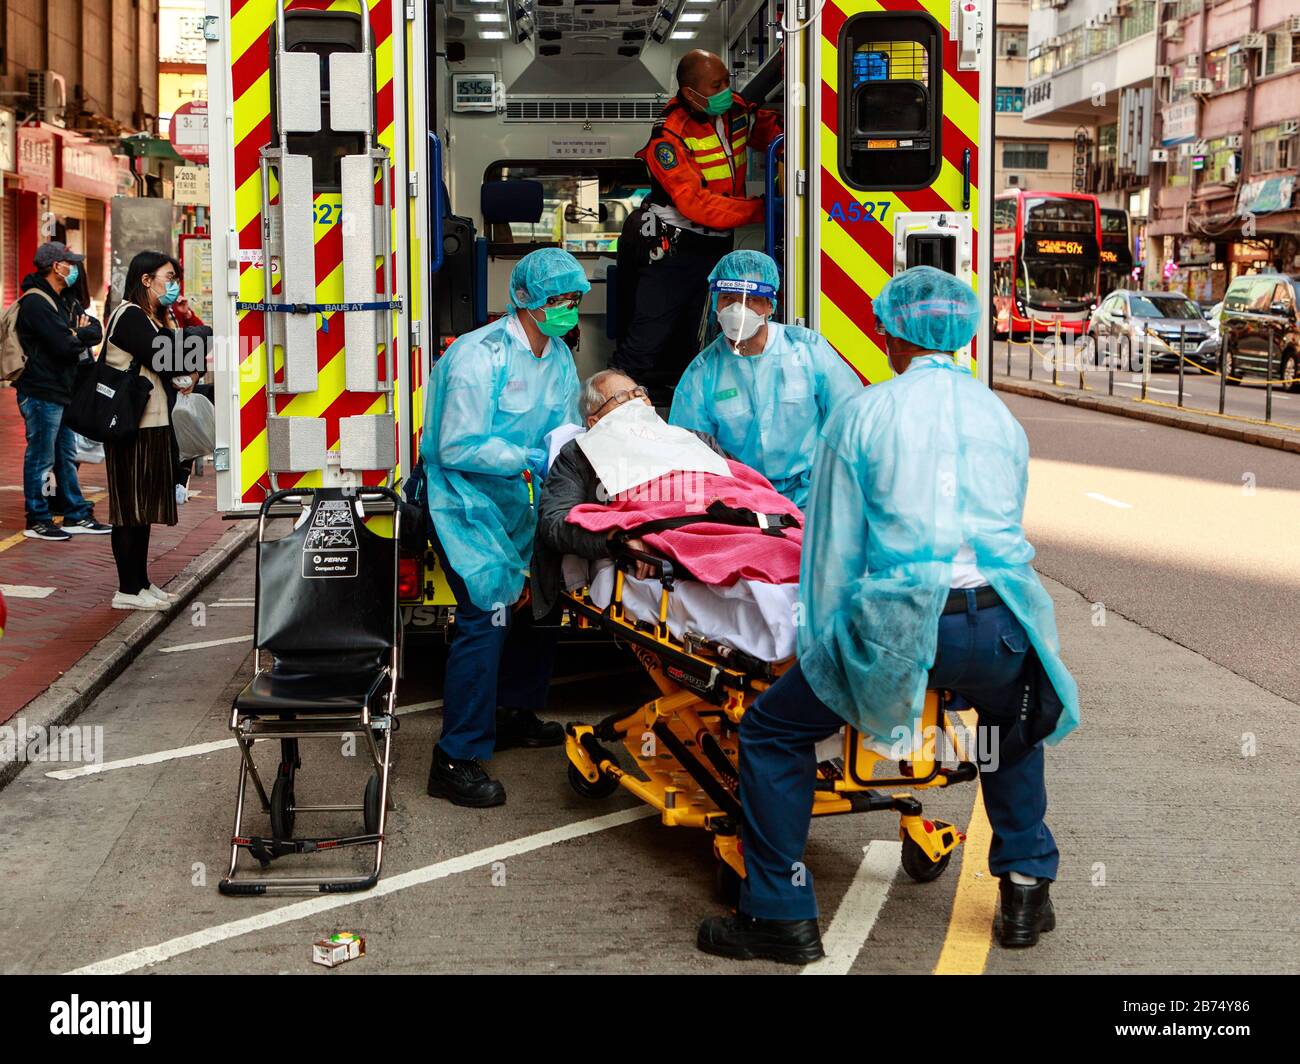 Ambulanceman in protective gear bring a patient to hospital in Hong Kong. Stock Photo